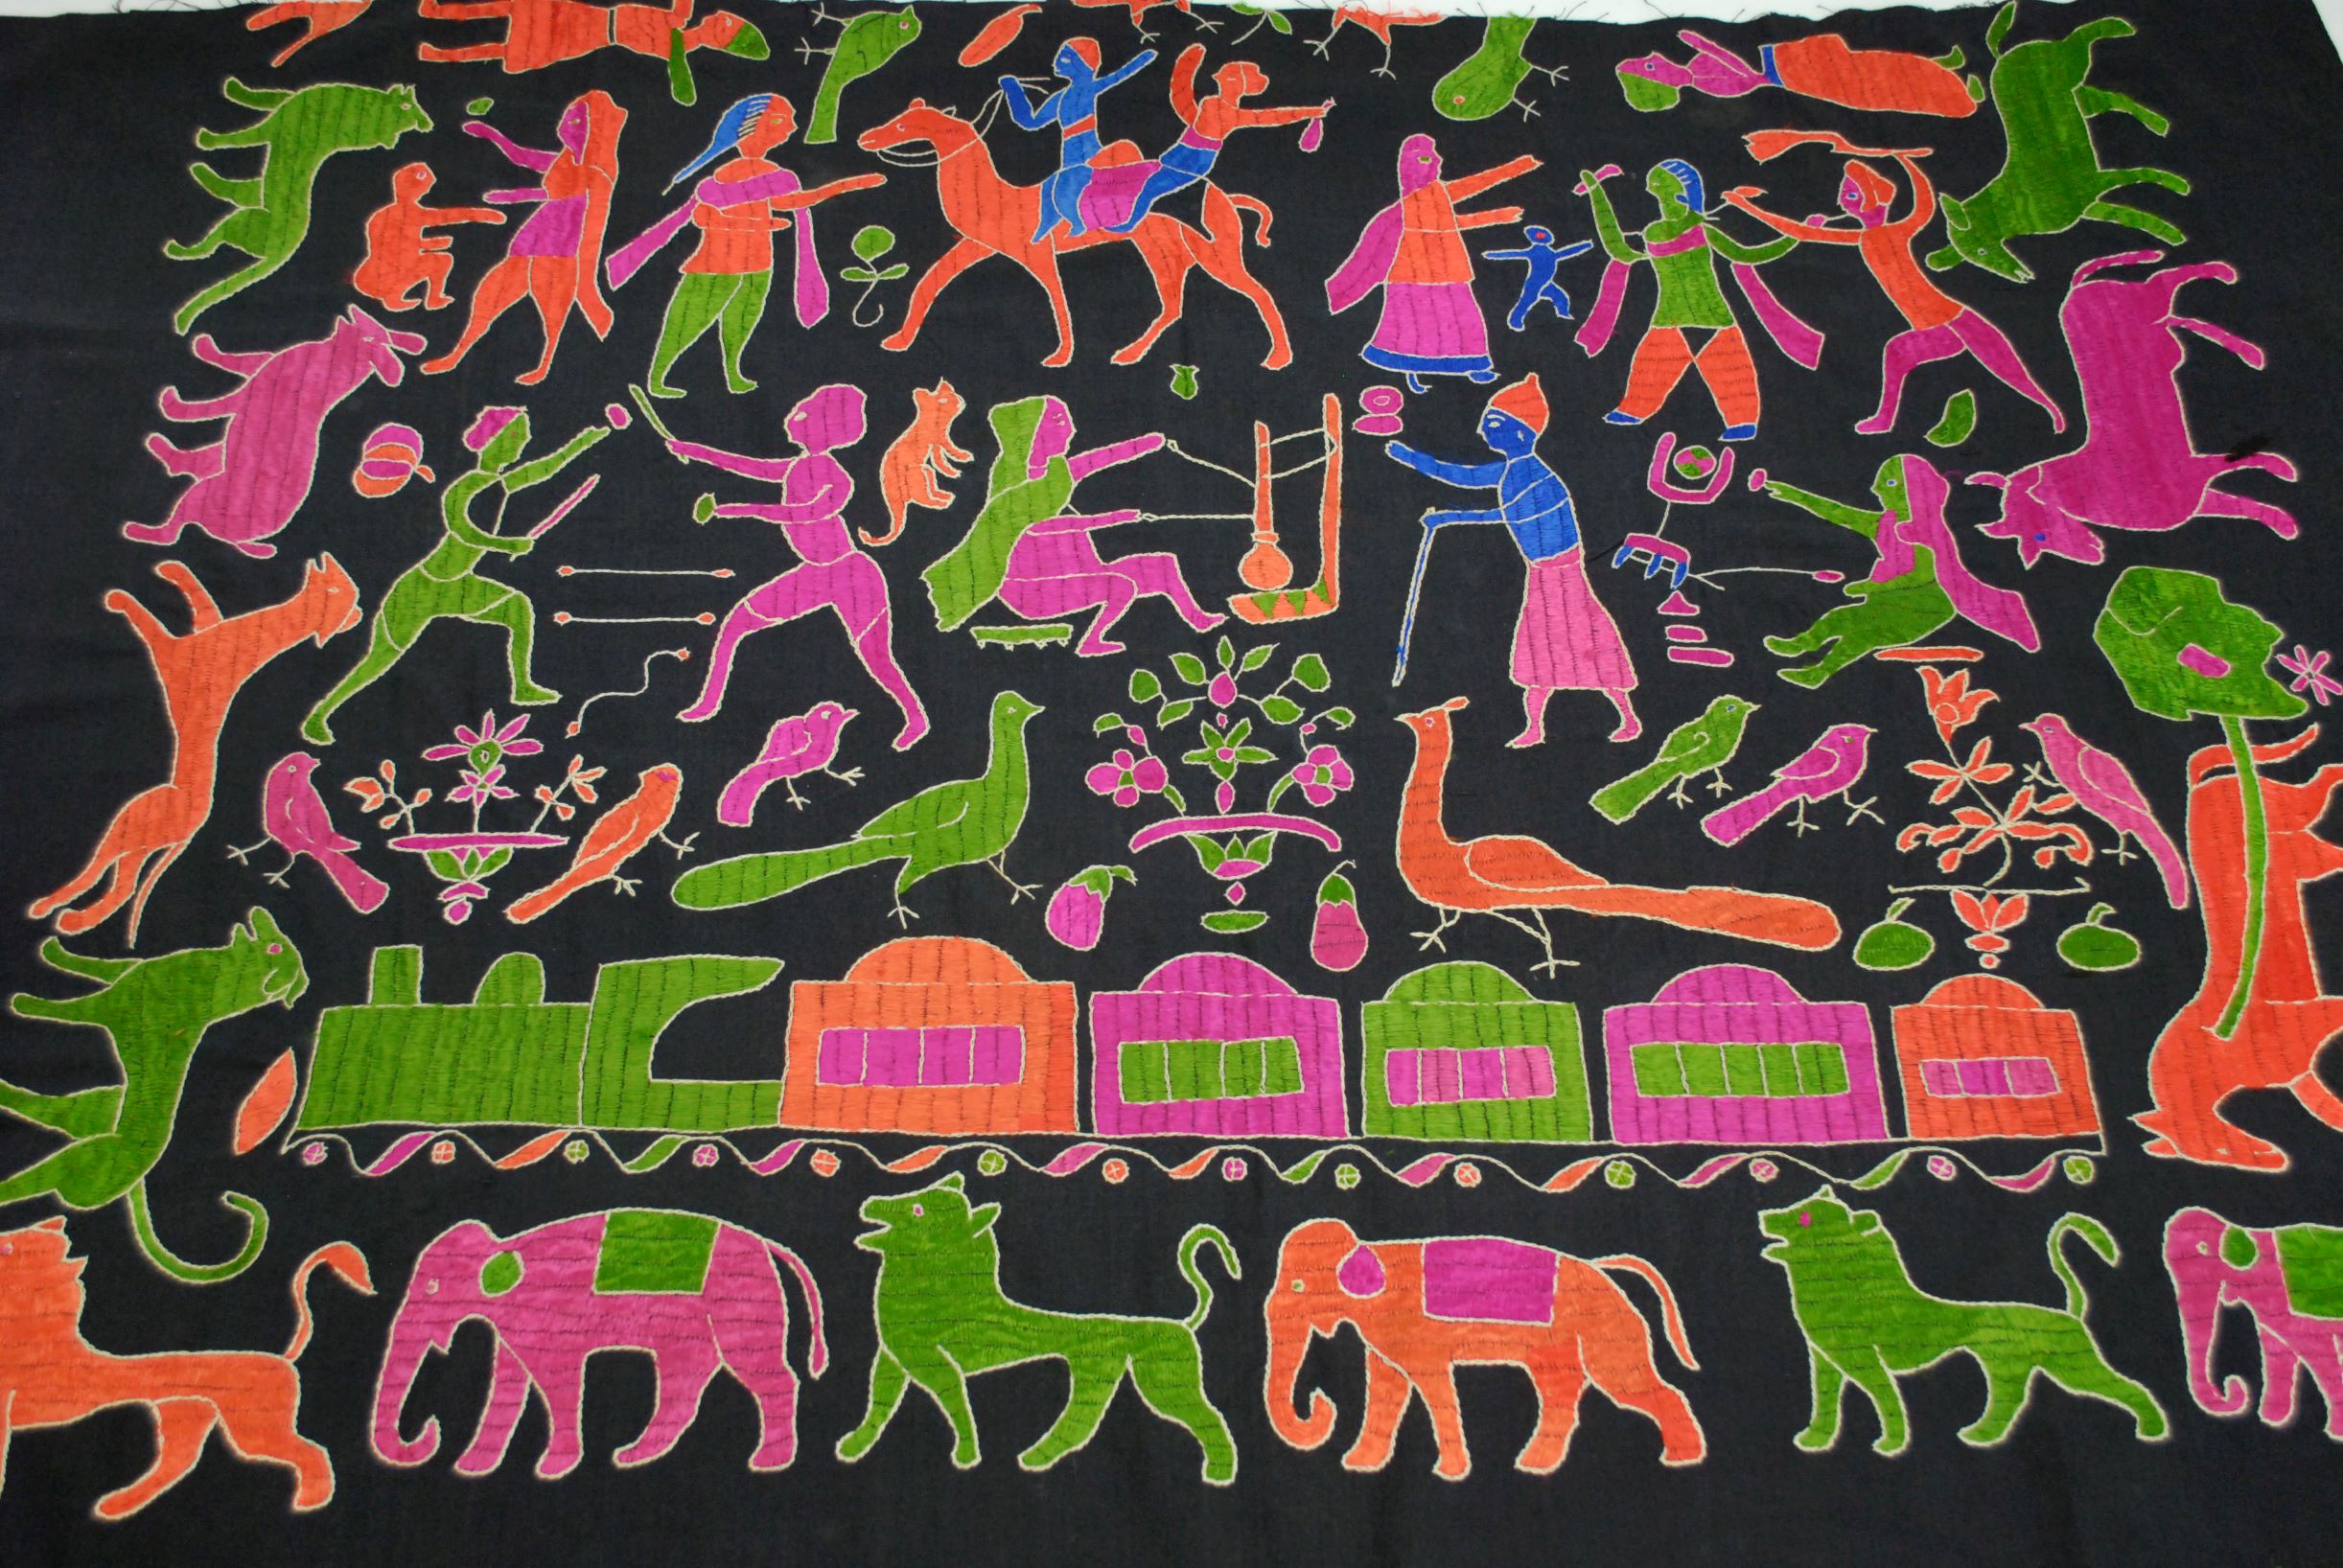 orange, blue, pink and green embroidered animals and people on a black cloth background